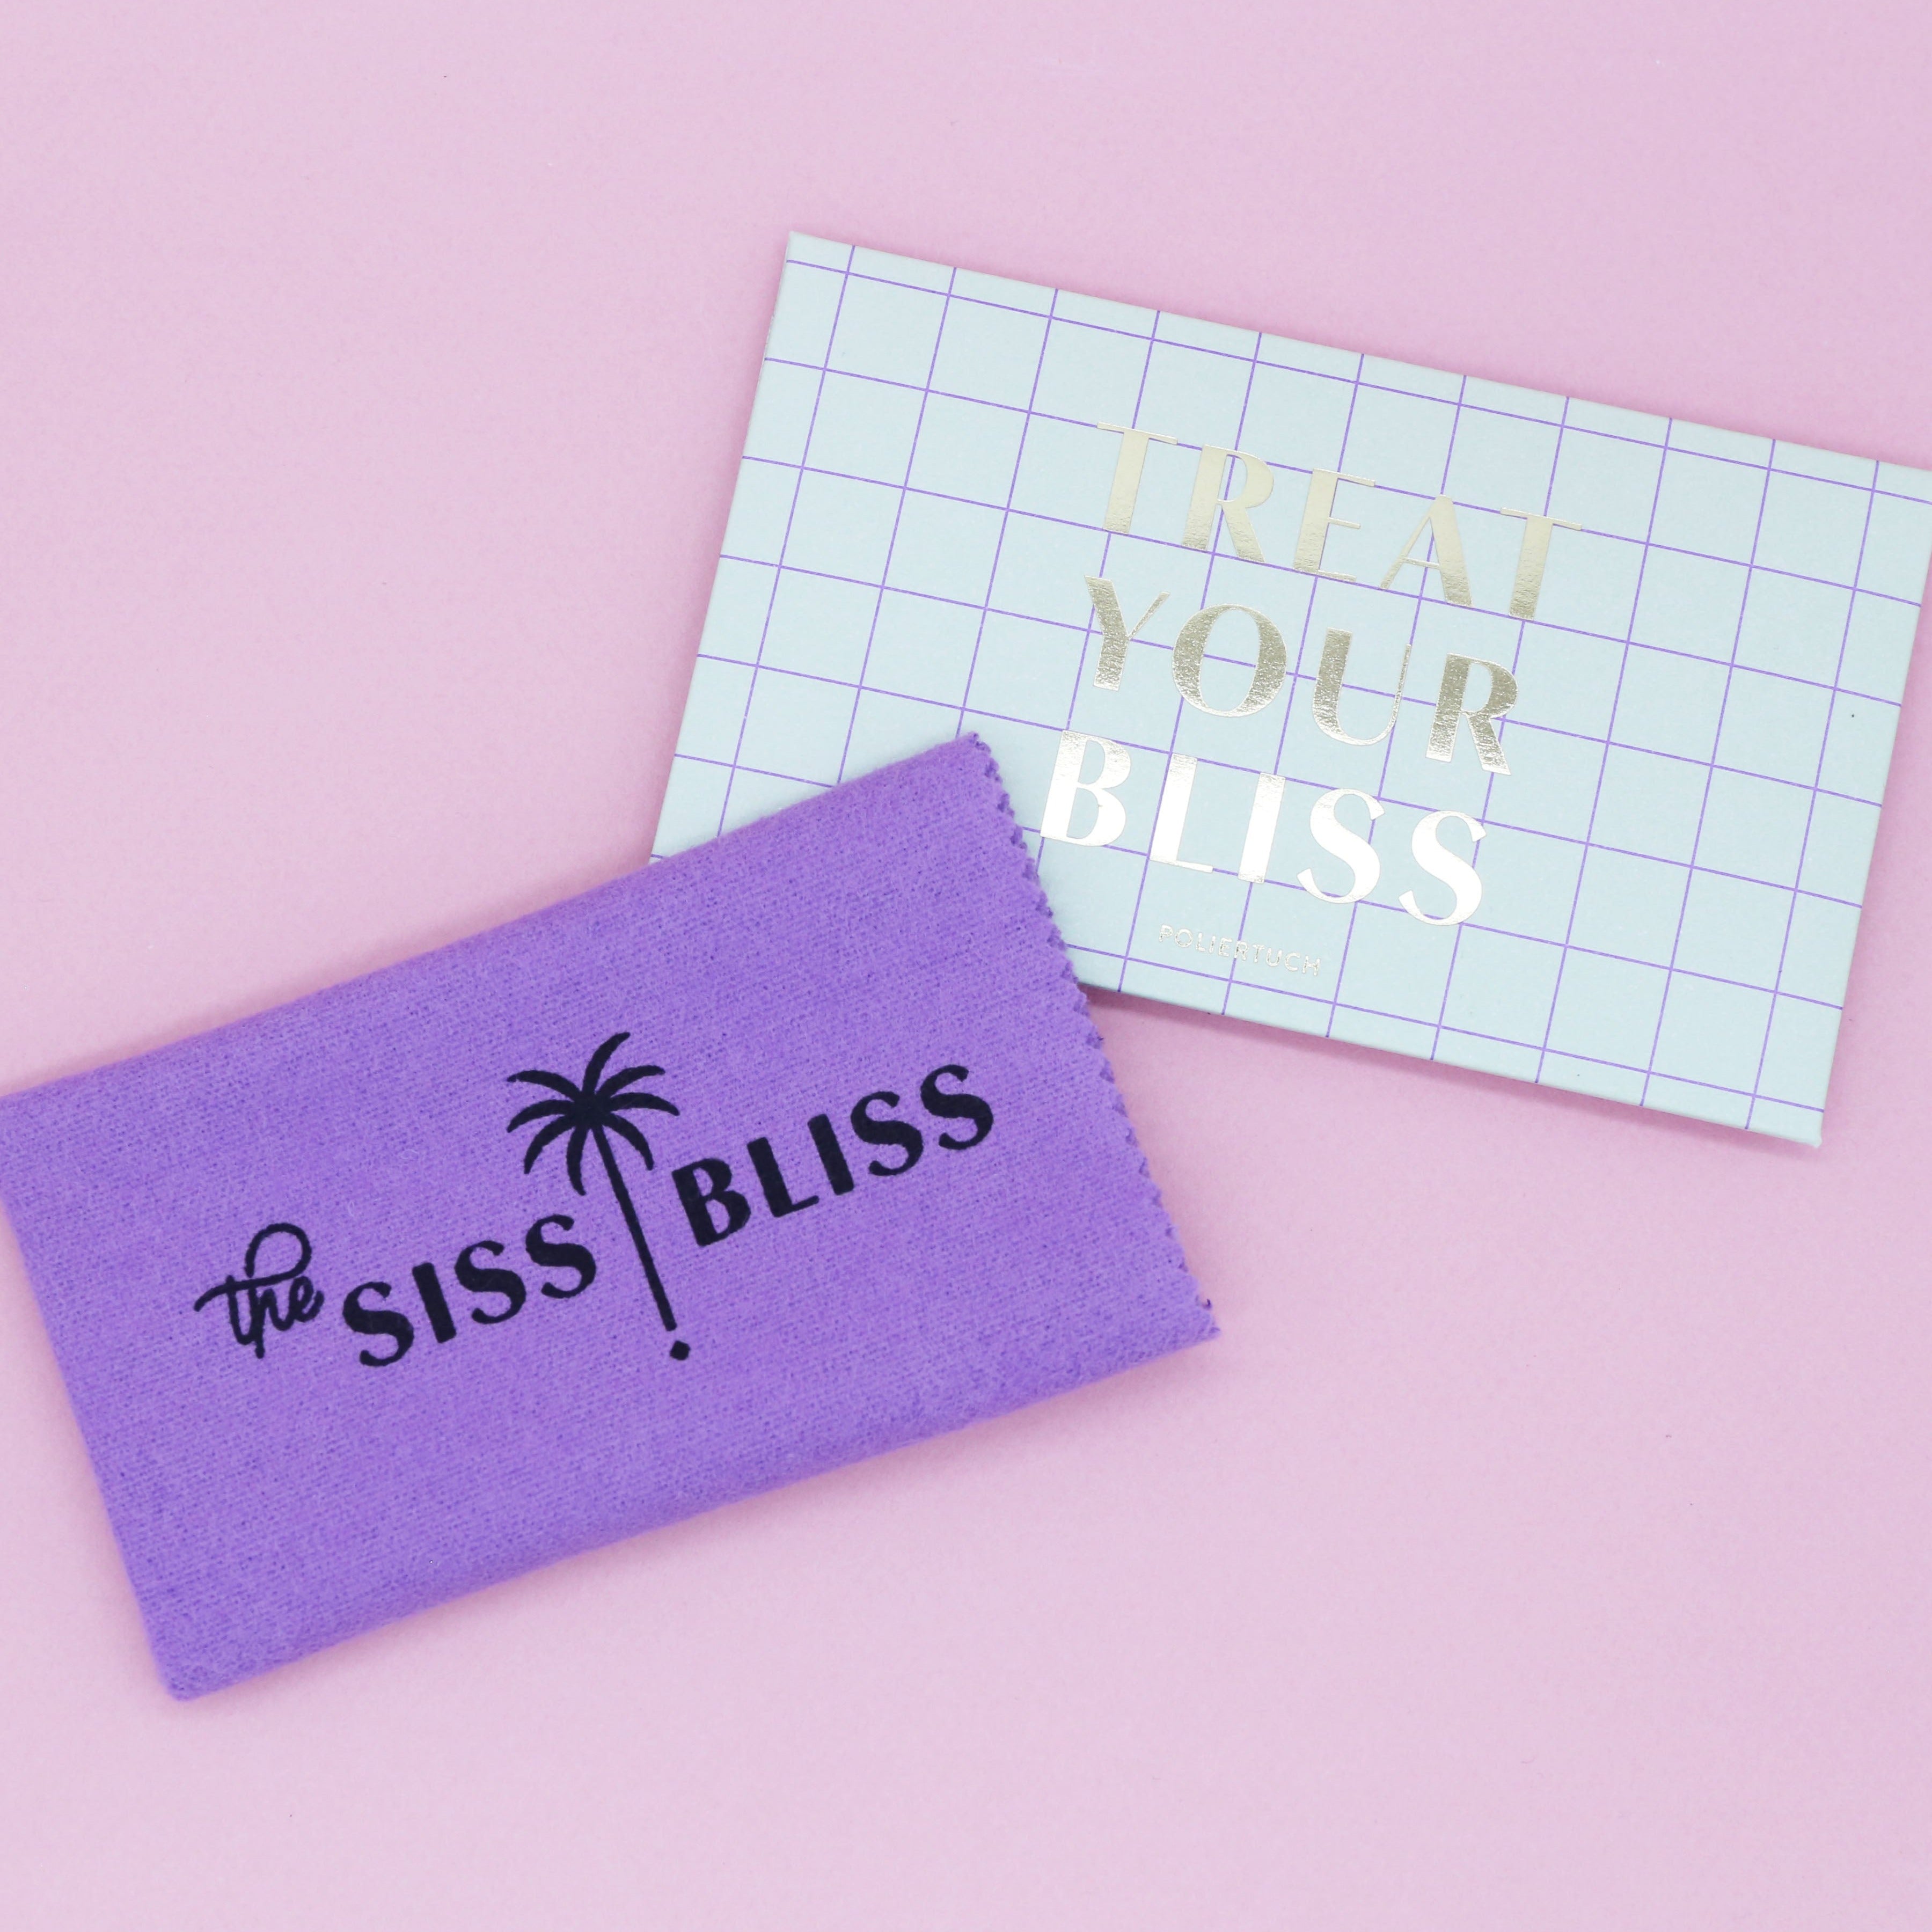 TREAT YOUR BLISS (Poliertuch) - The SISS BLISS GmbH